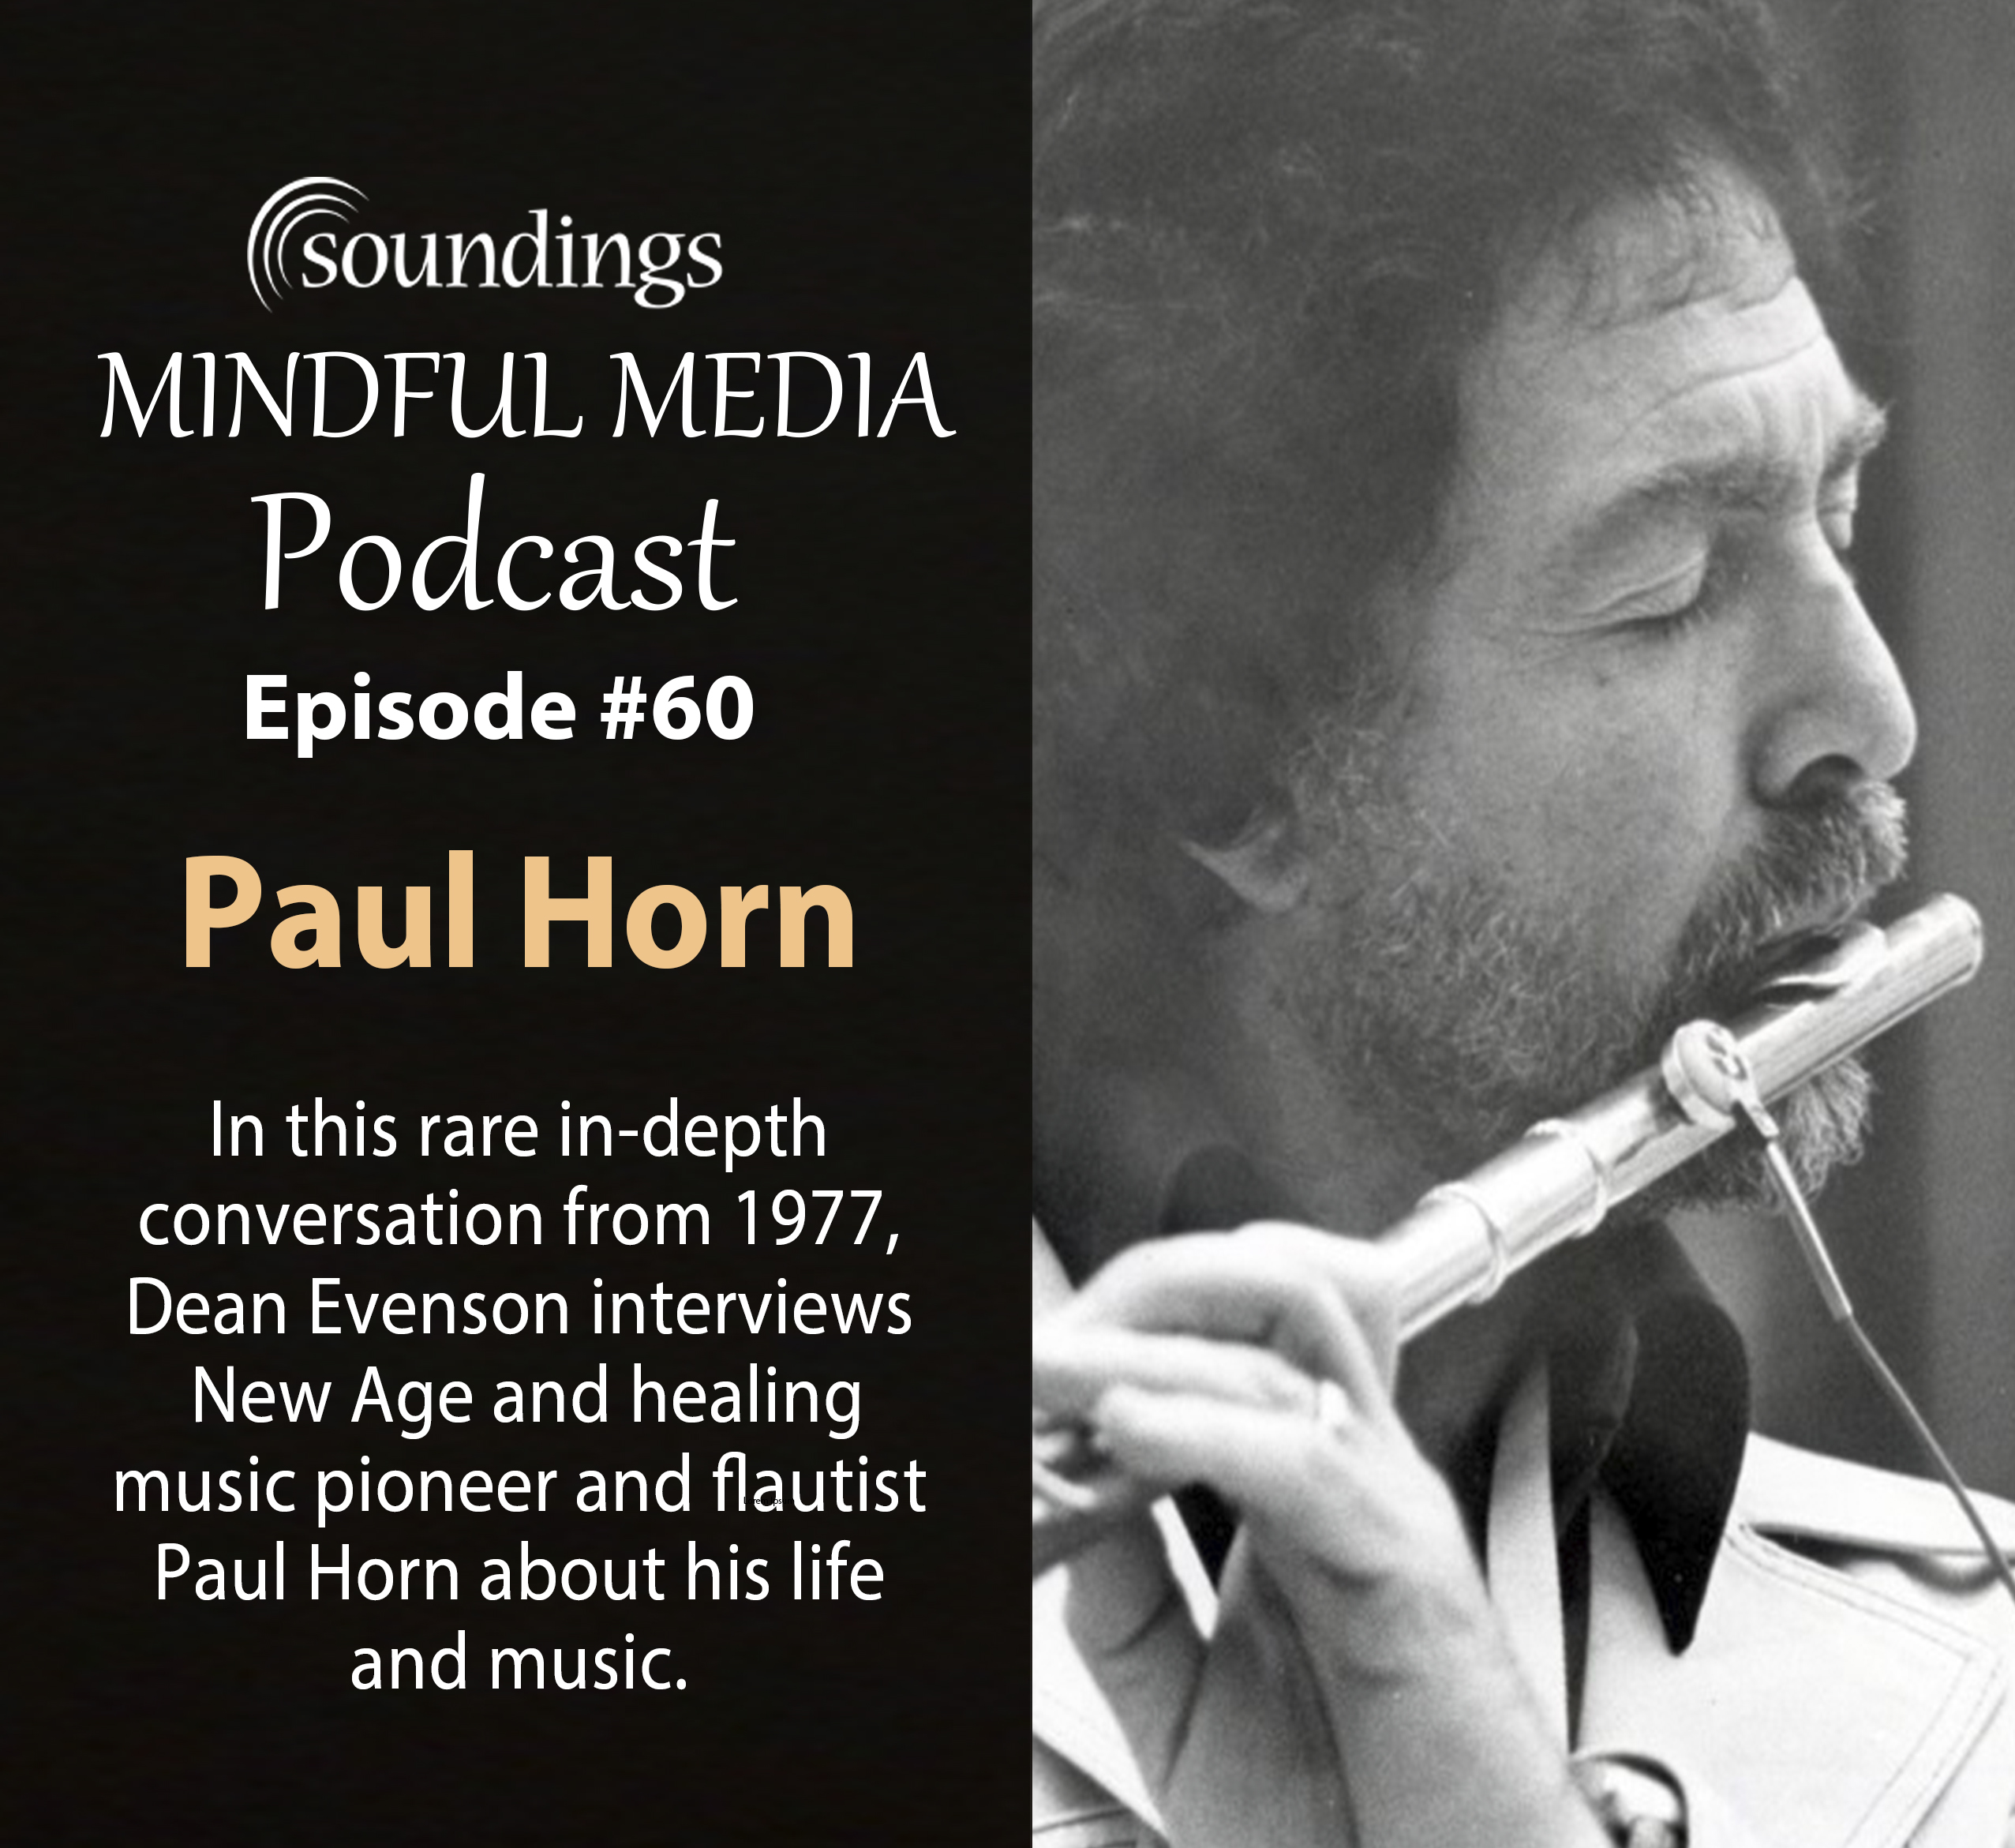 Interview with Paul Horn on Soundings Mindful Media Podcast